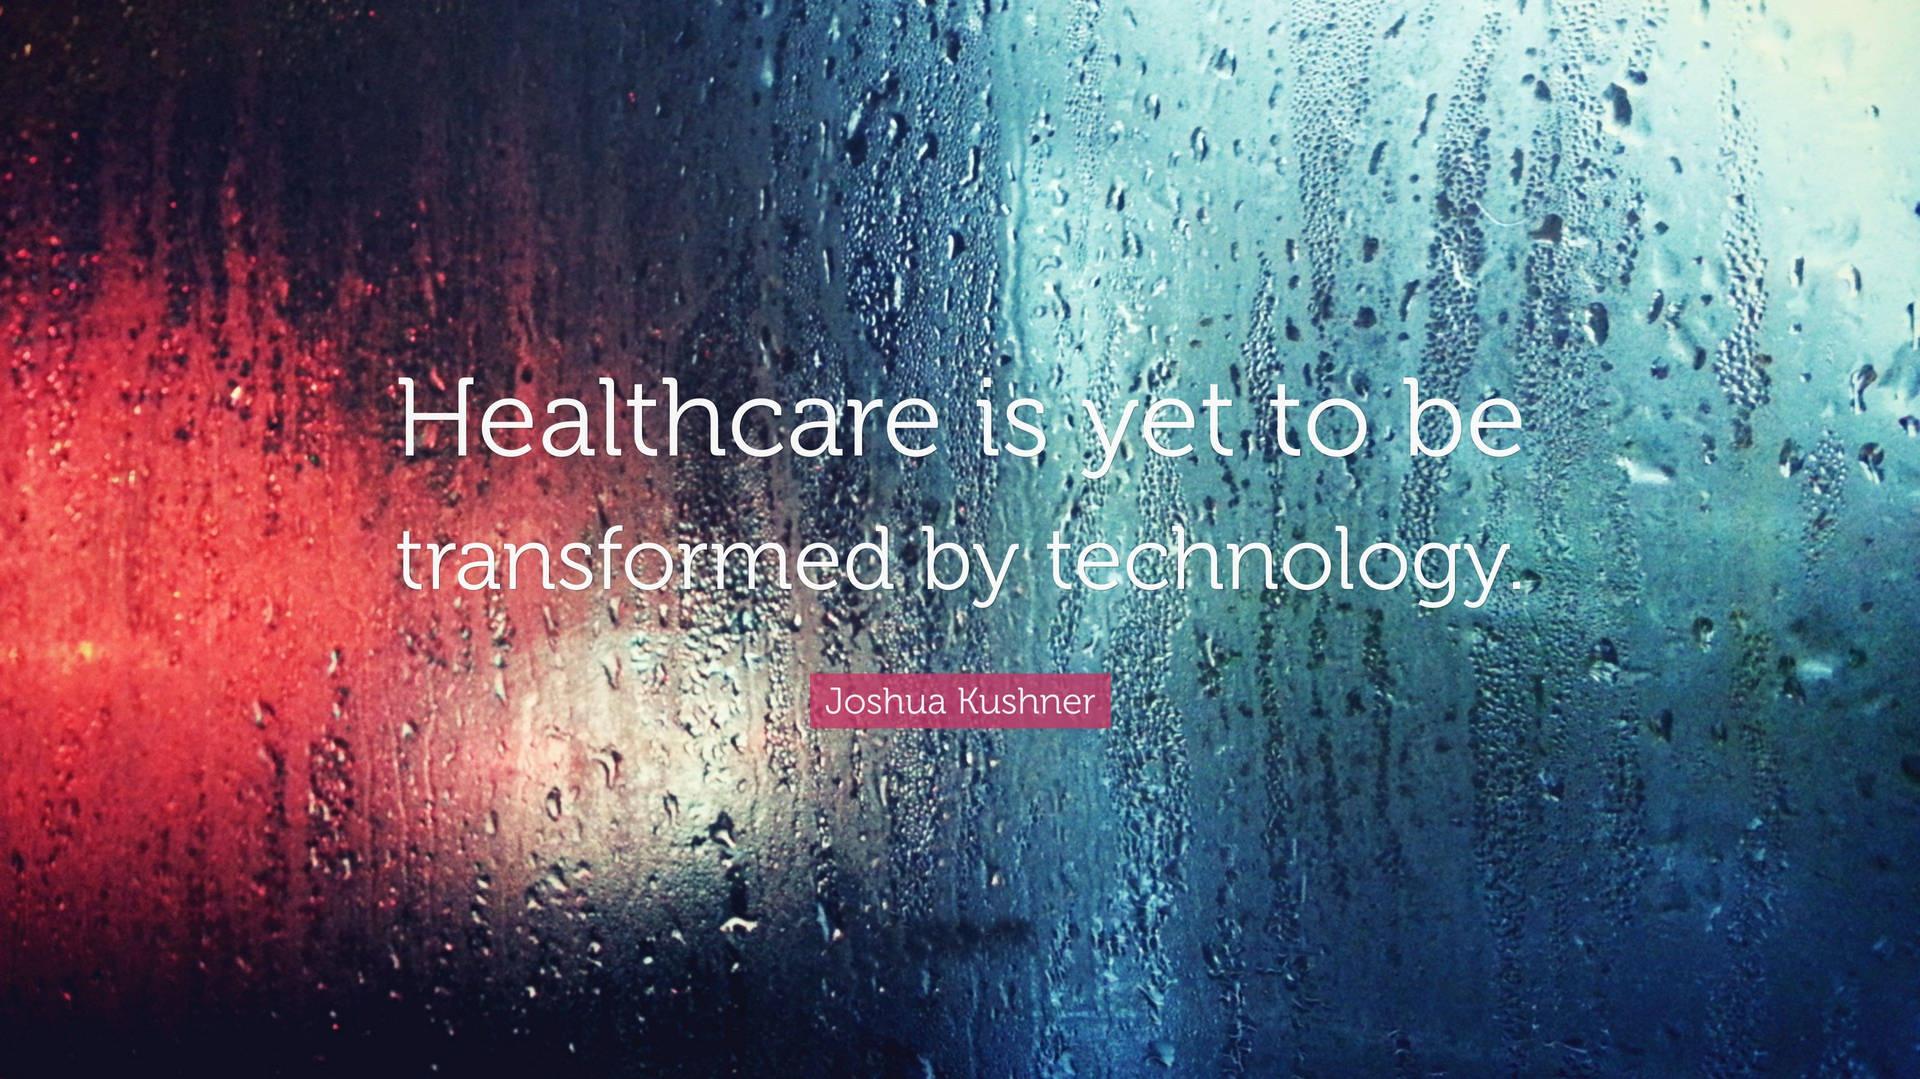 Download Healthcare Technology Quote Wallpaper